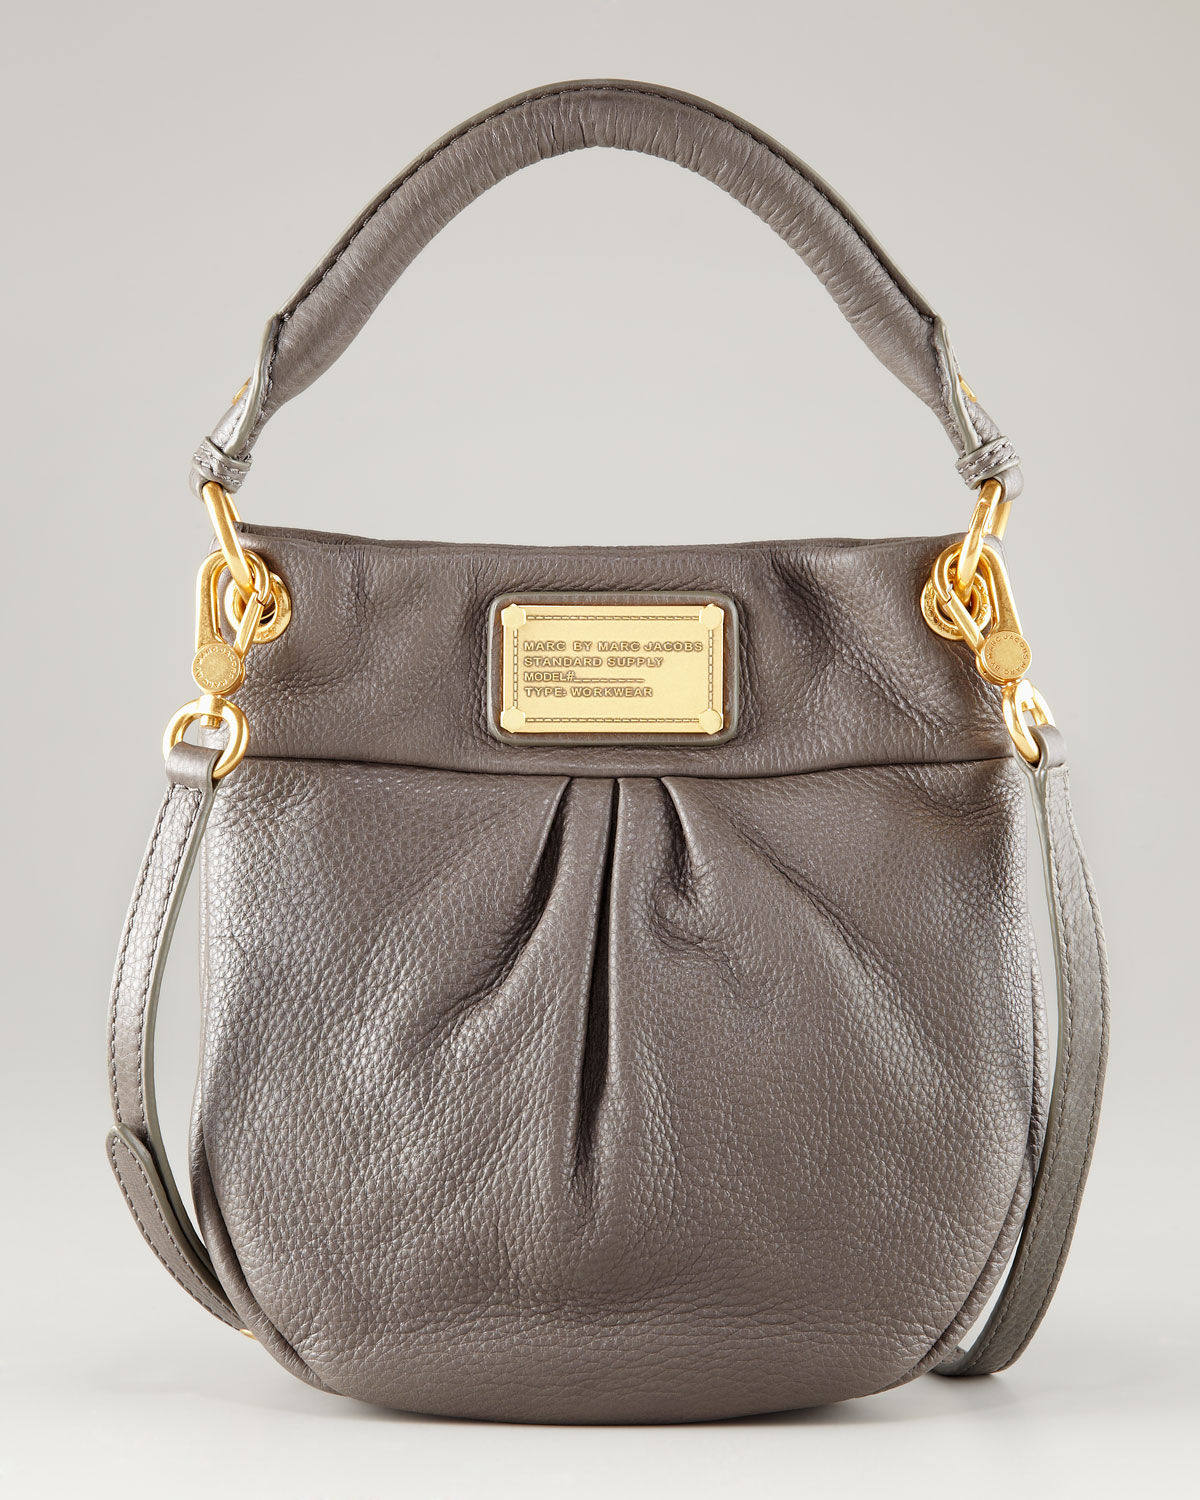 Lyst - Marc By Marc Jacobs Classic Q Mini Hillier Hobo Faded Alum in Gray